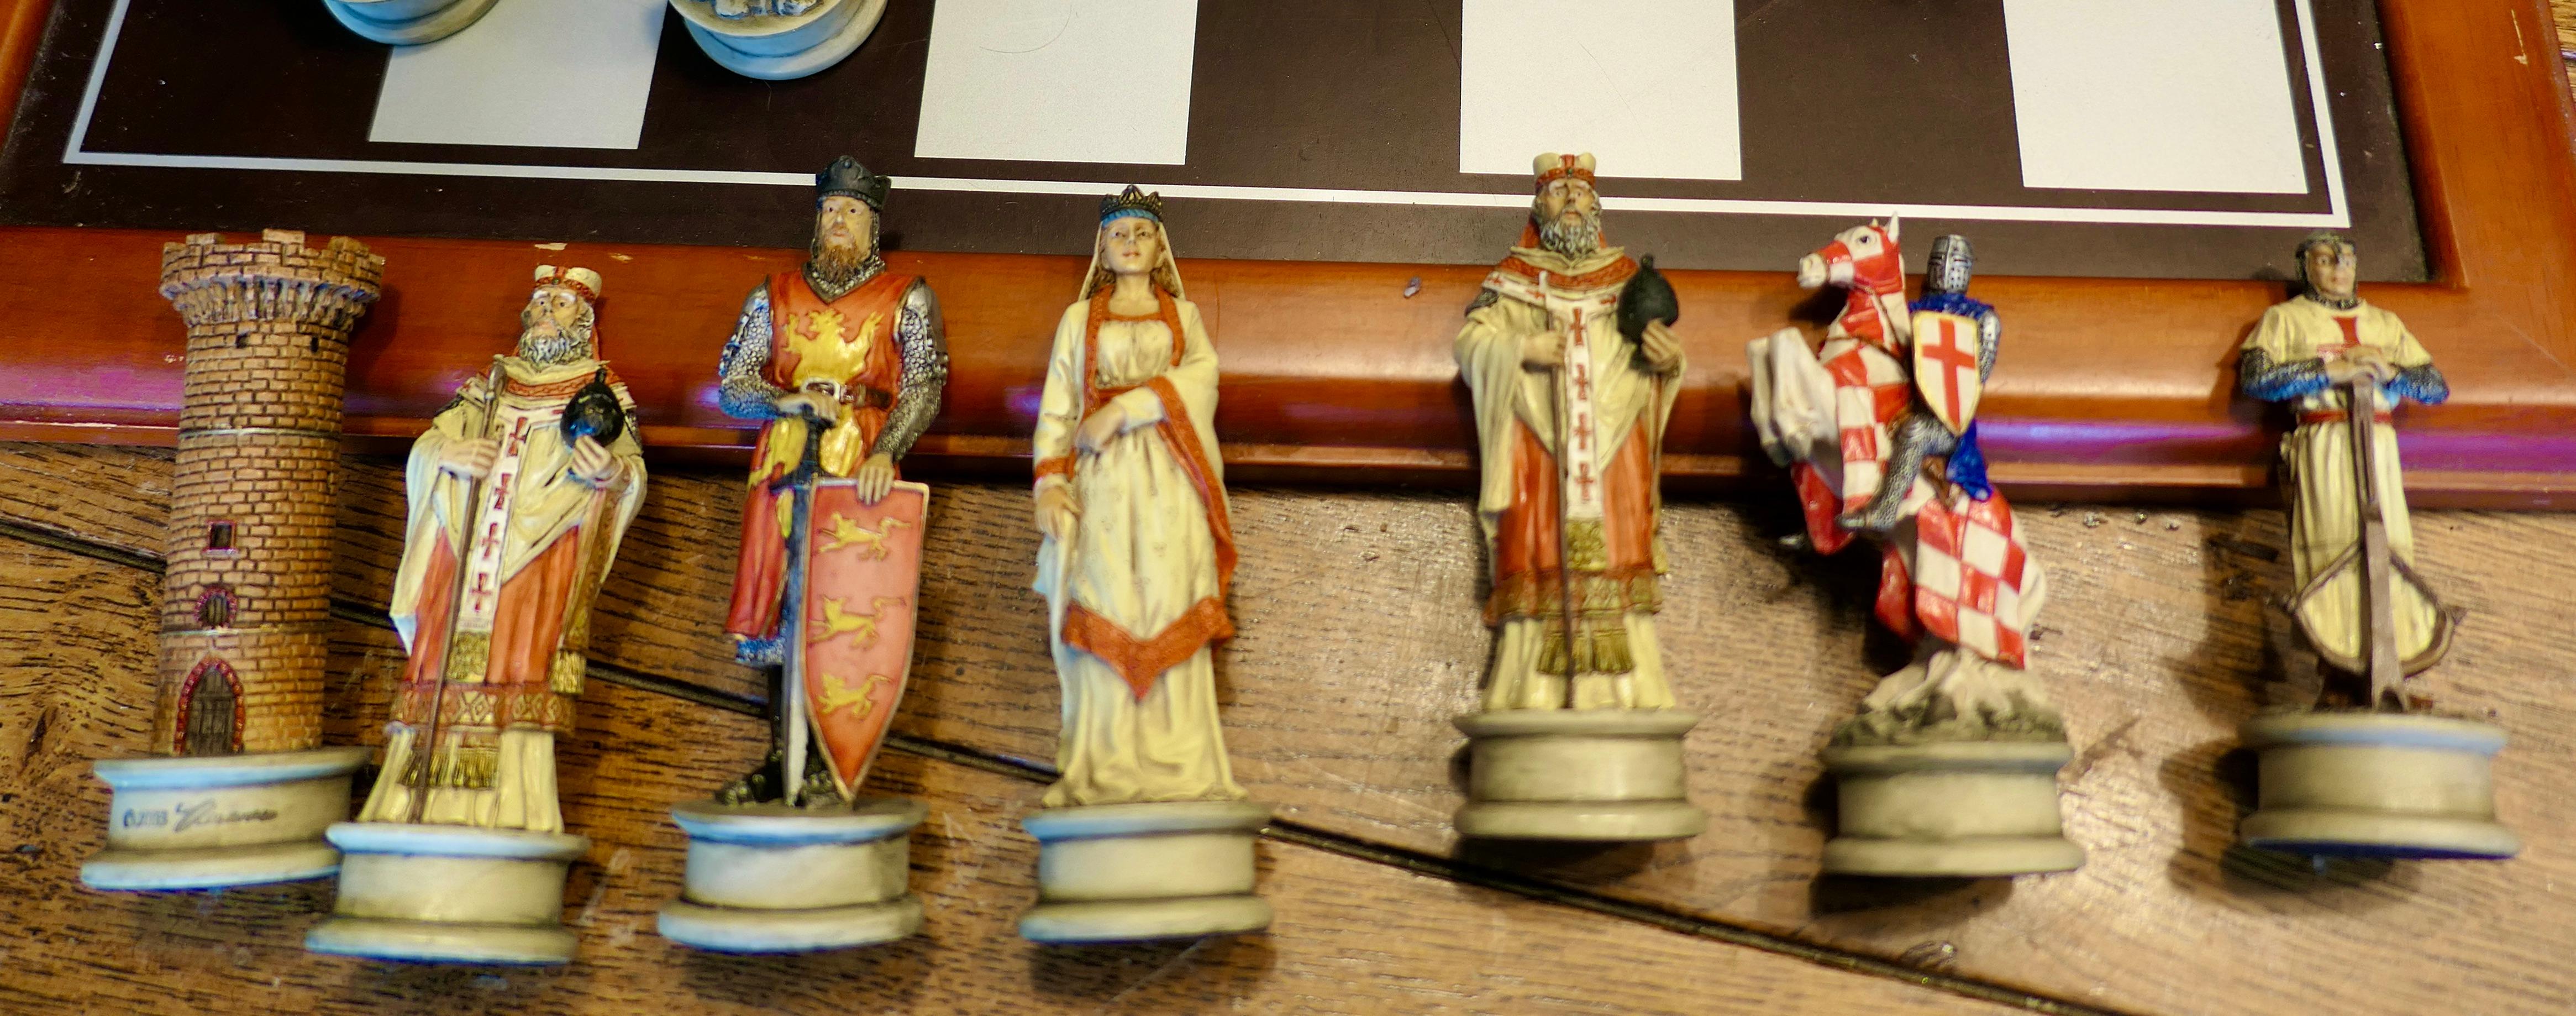 Chess Set with Crusader and Saracen Figures  An interesting slant on the game   For Sale 1